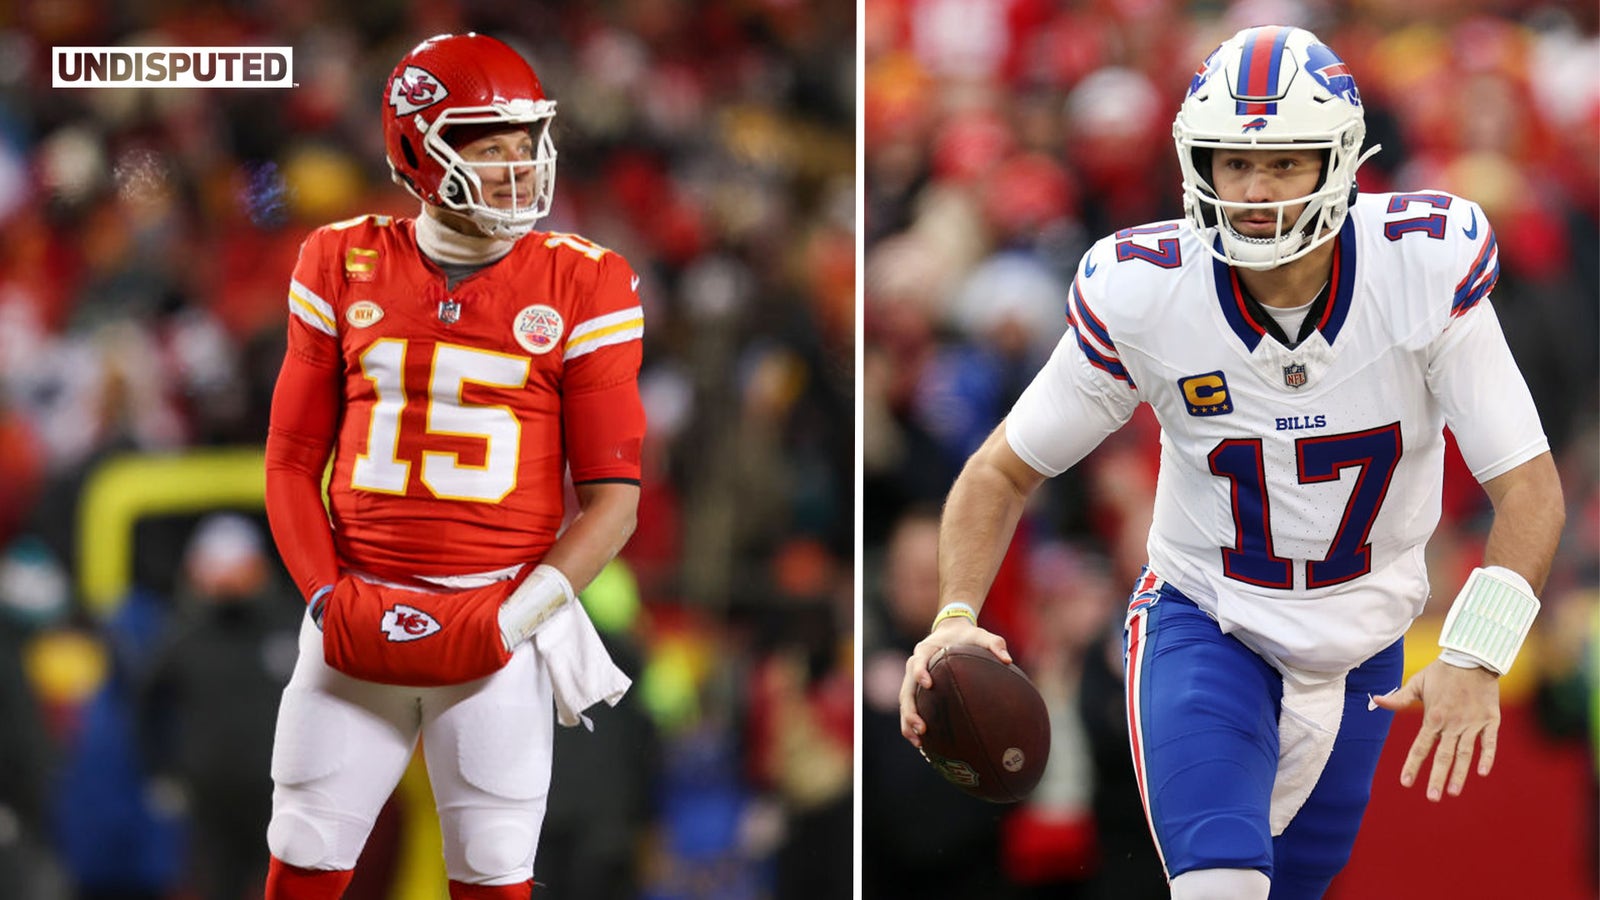 Josh Allen 0-2 in playoffs vs. Patrick Mahomes - third time's a charm for Bills? 